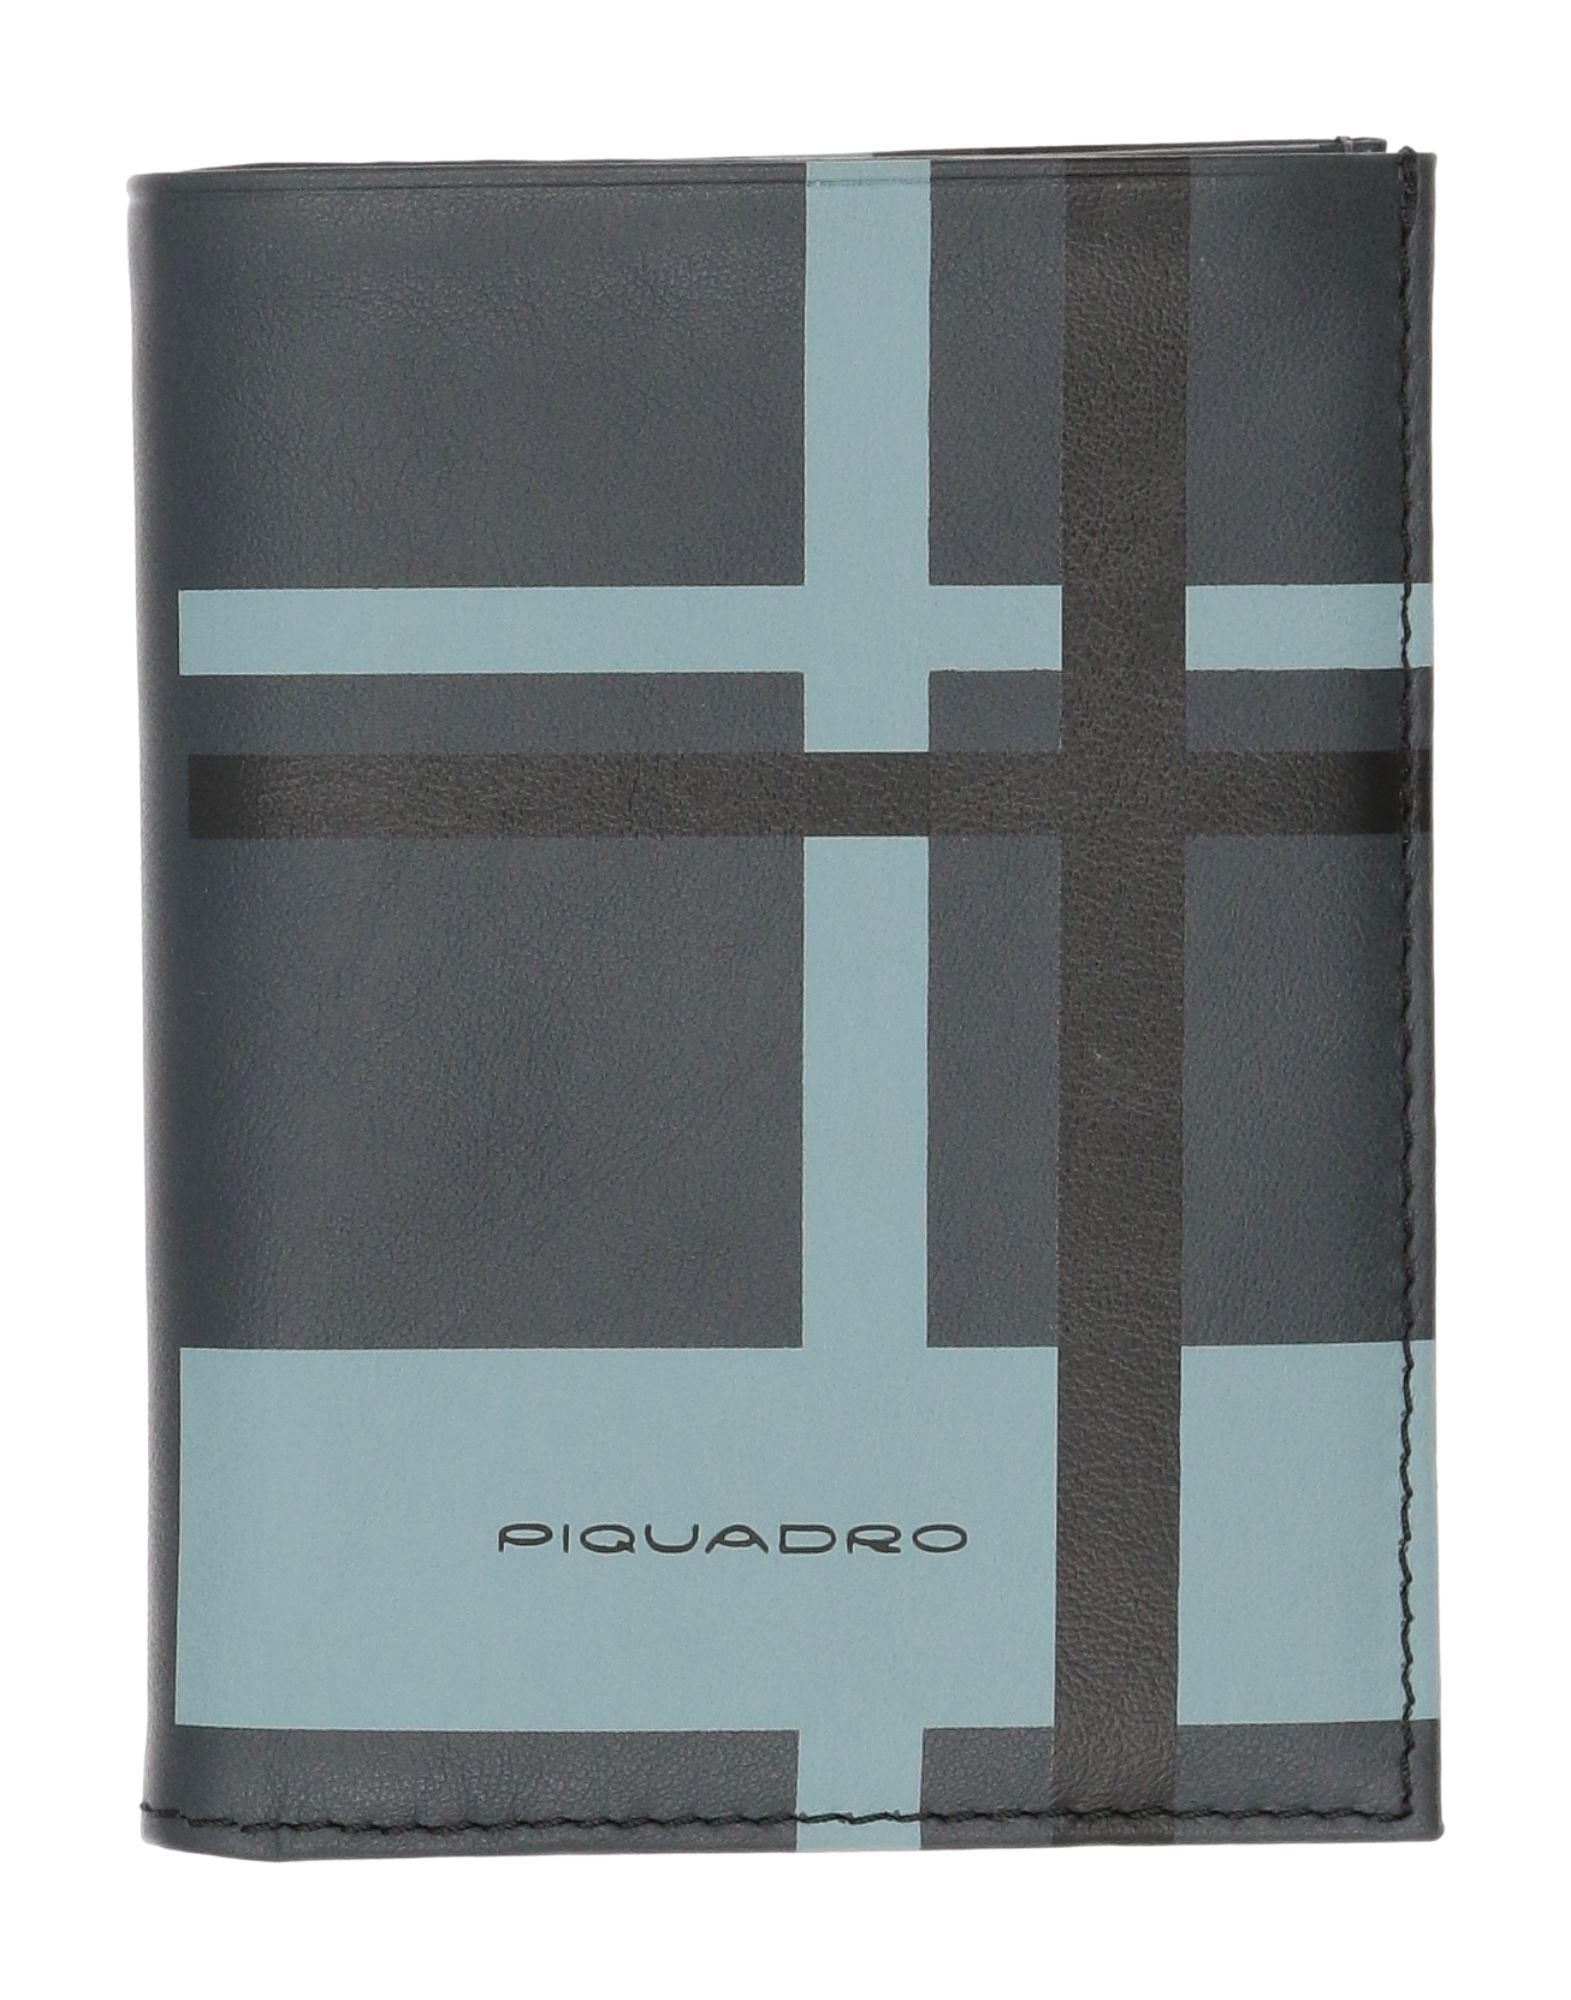 Piquadro Leather Wallet in Lead (Gray) for Men | Lyst